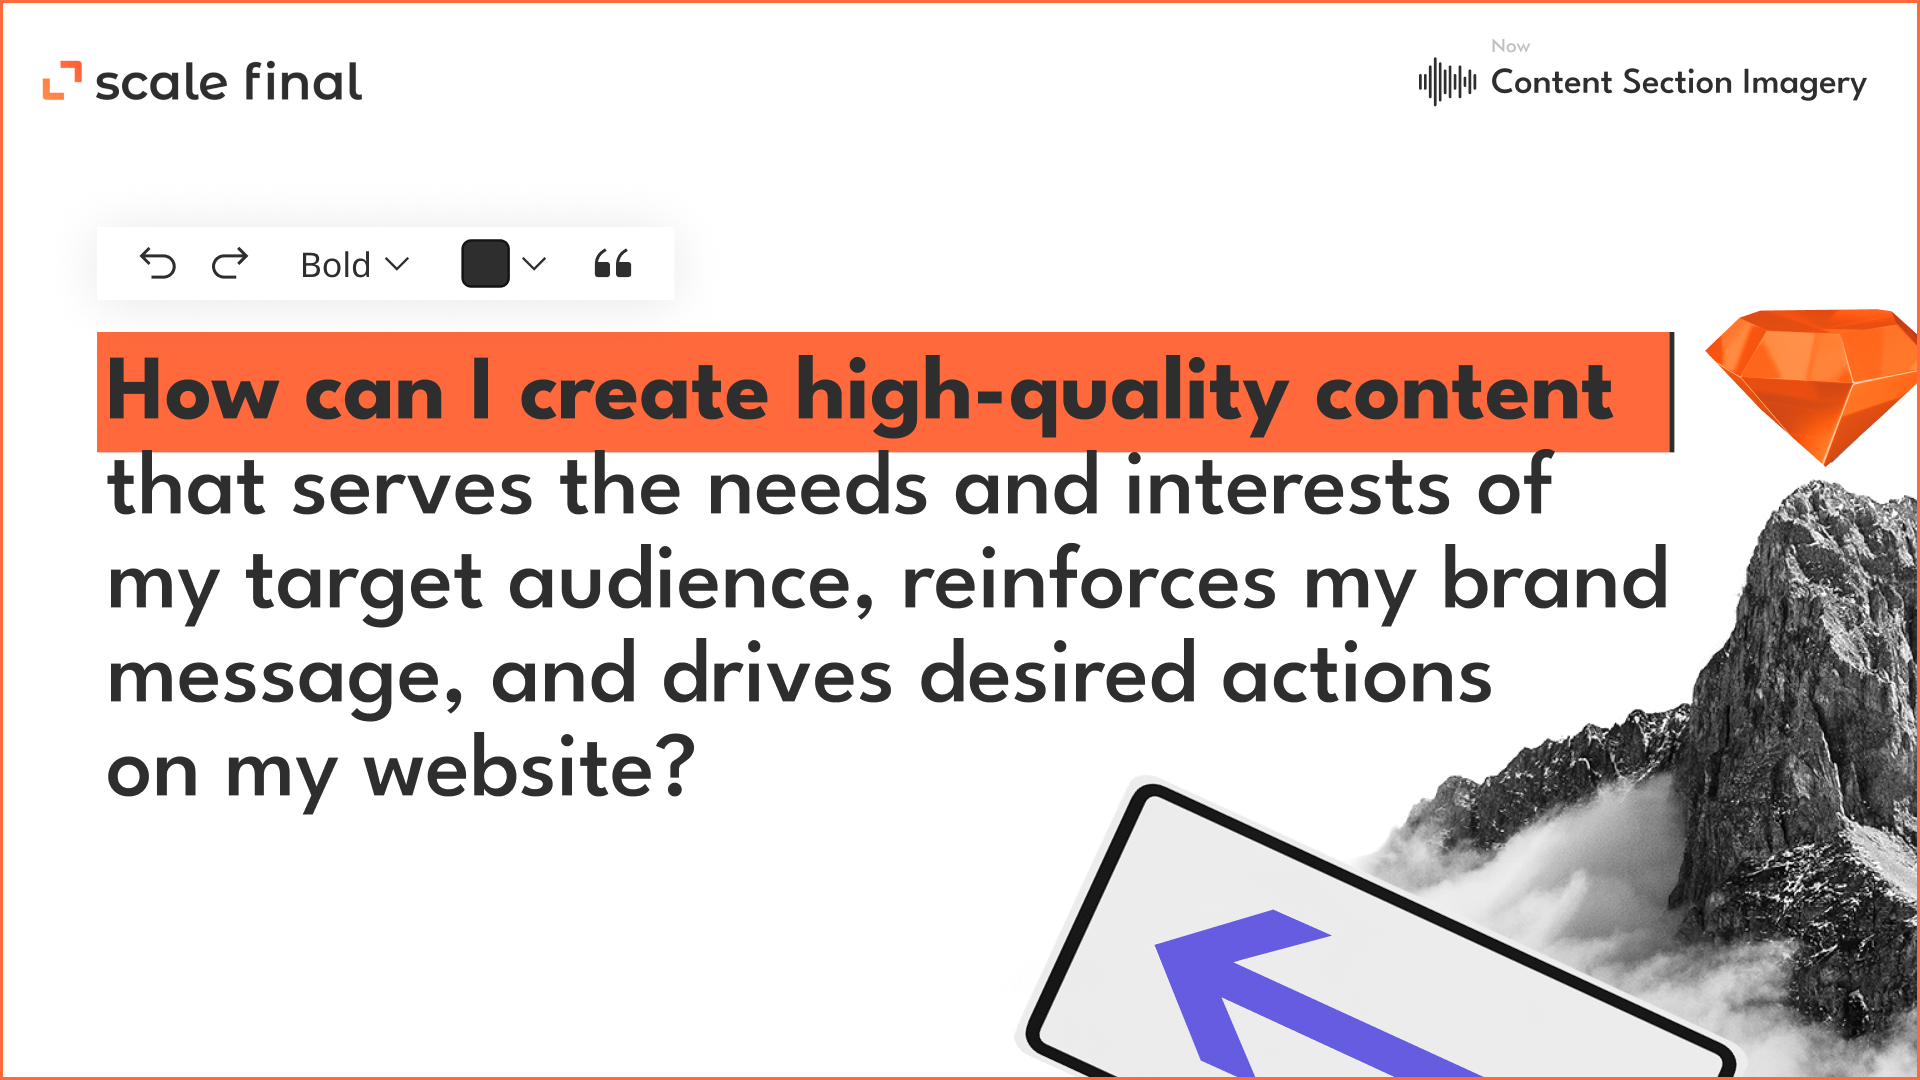 How can I create high-quality content that serves the needs and interests of my target audience, reinforces my brand message, and drives desired actions on my website?